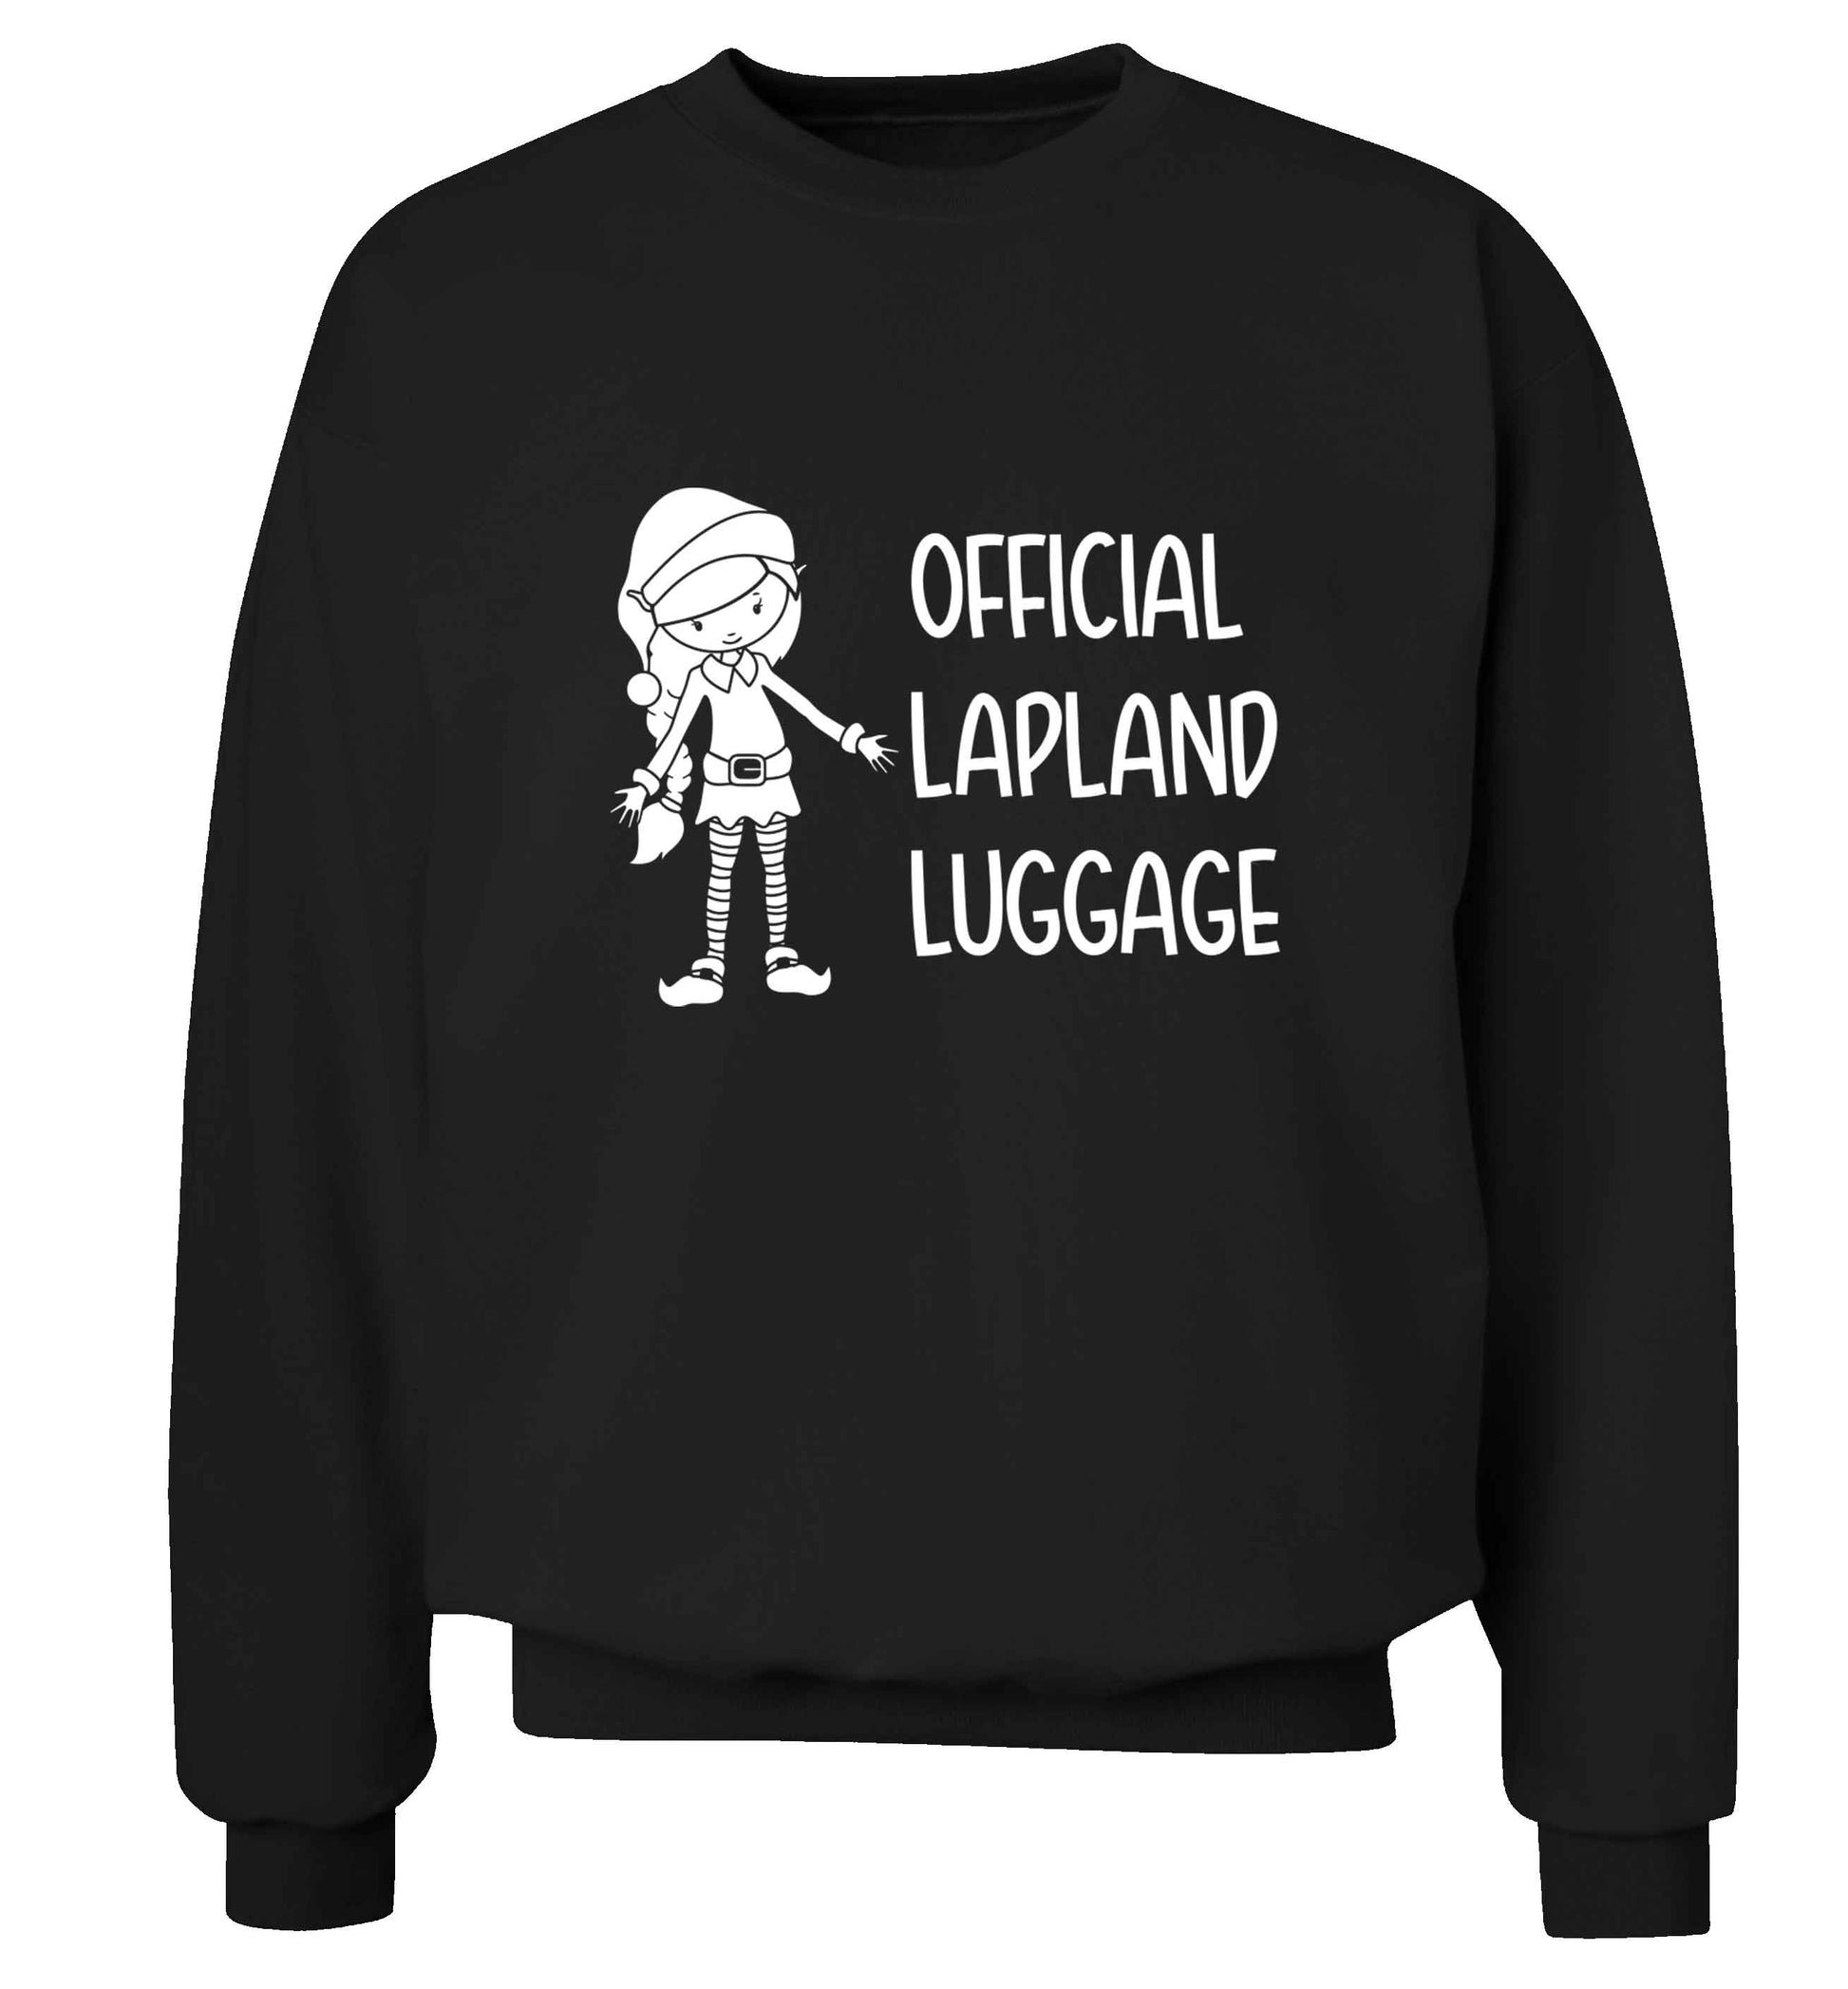 Official lapland luggage - Elf snowflake adult's unisex black sweater 2XL